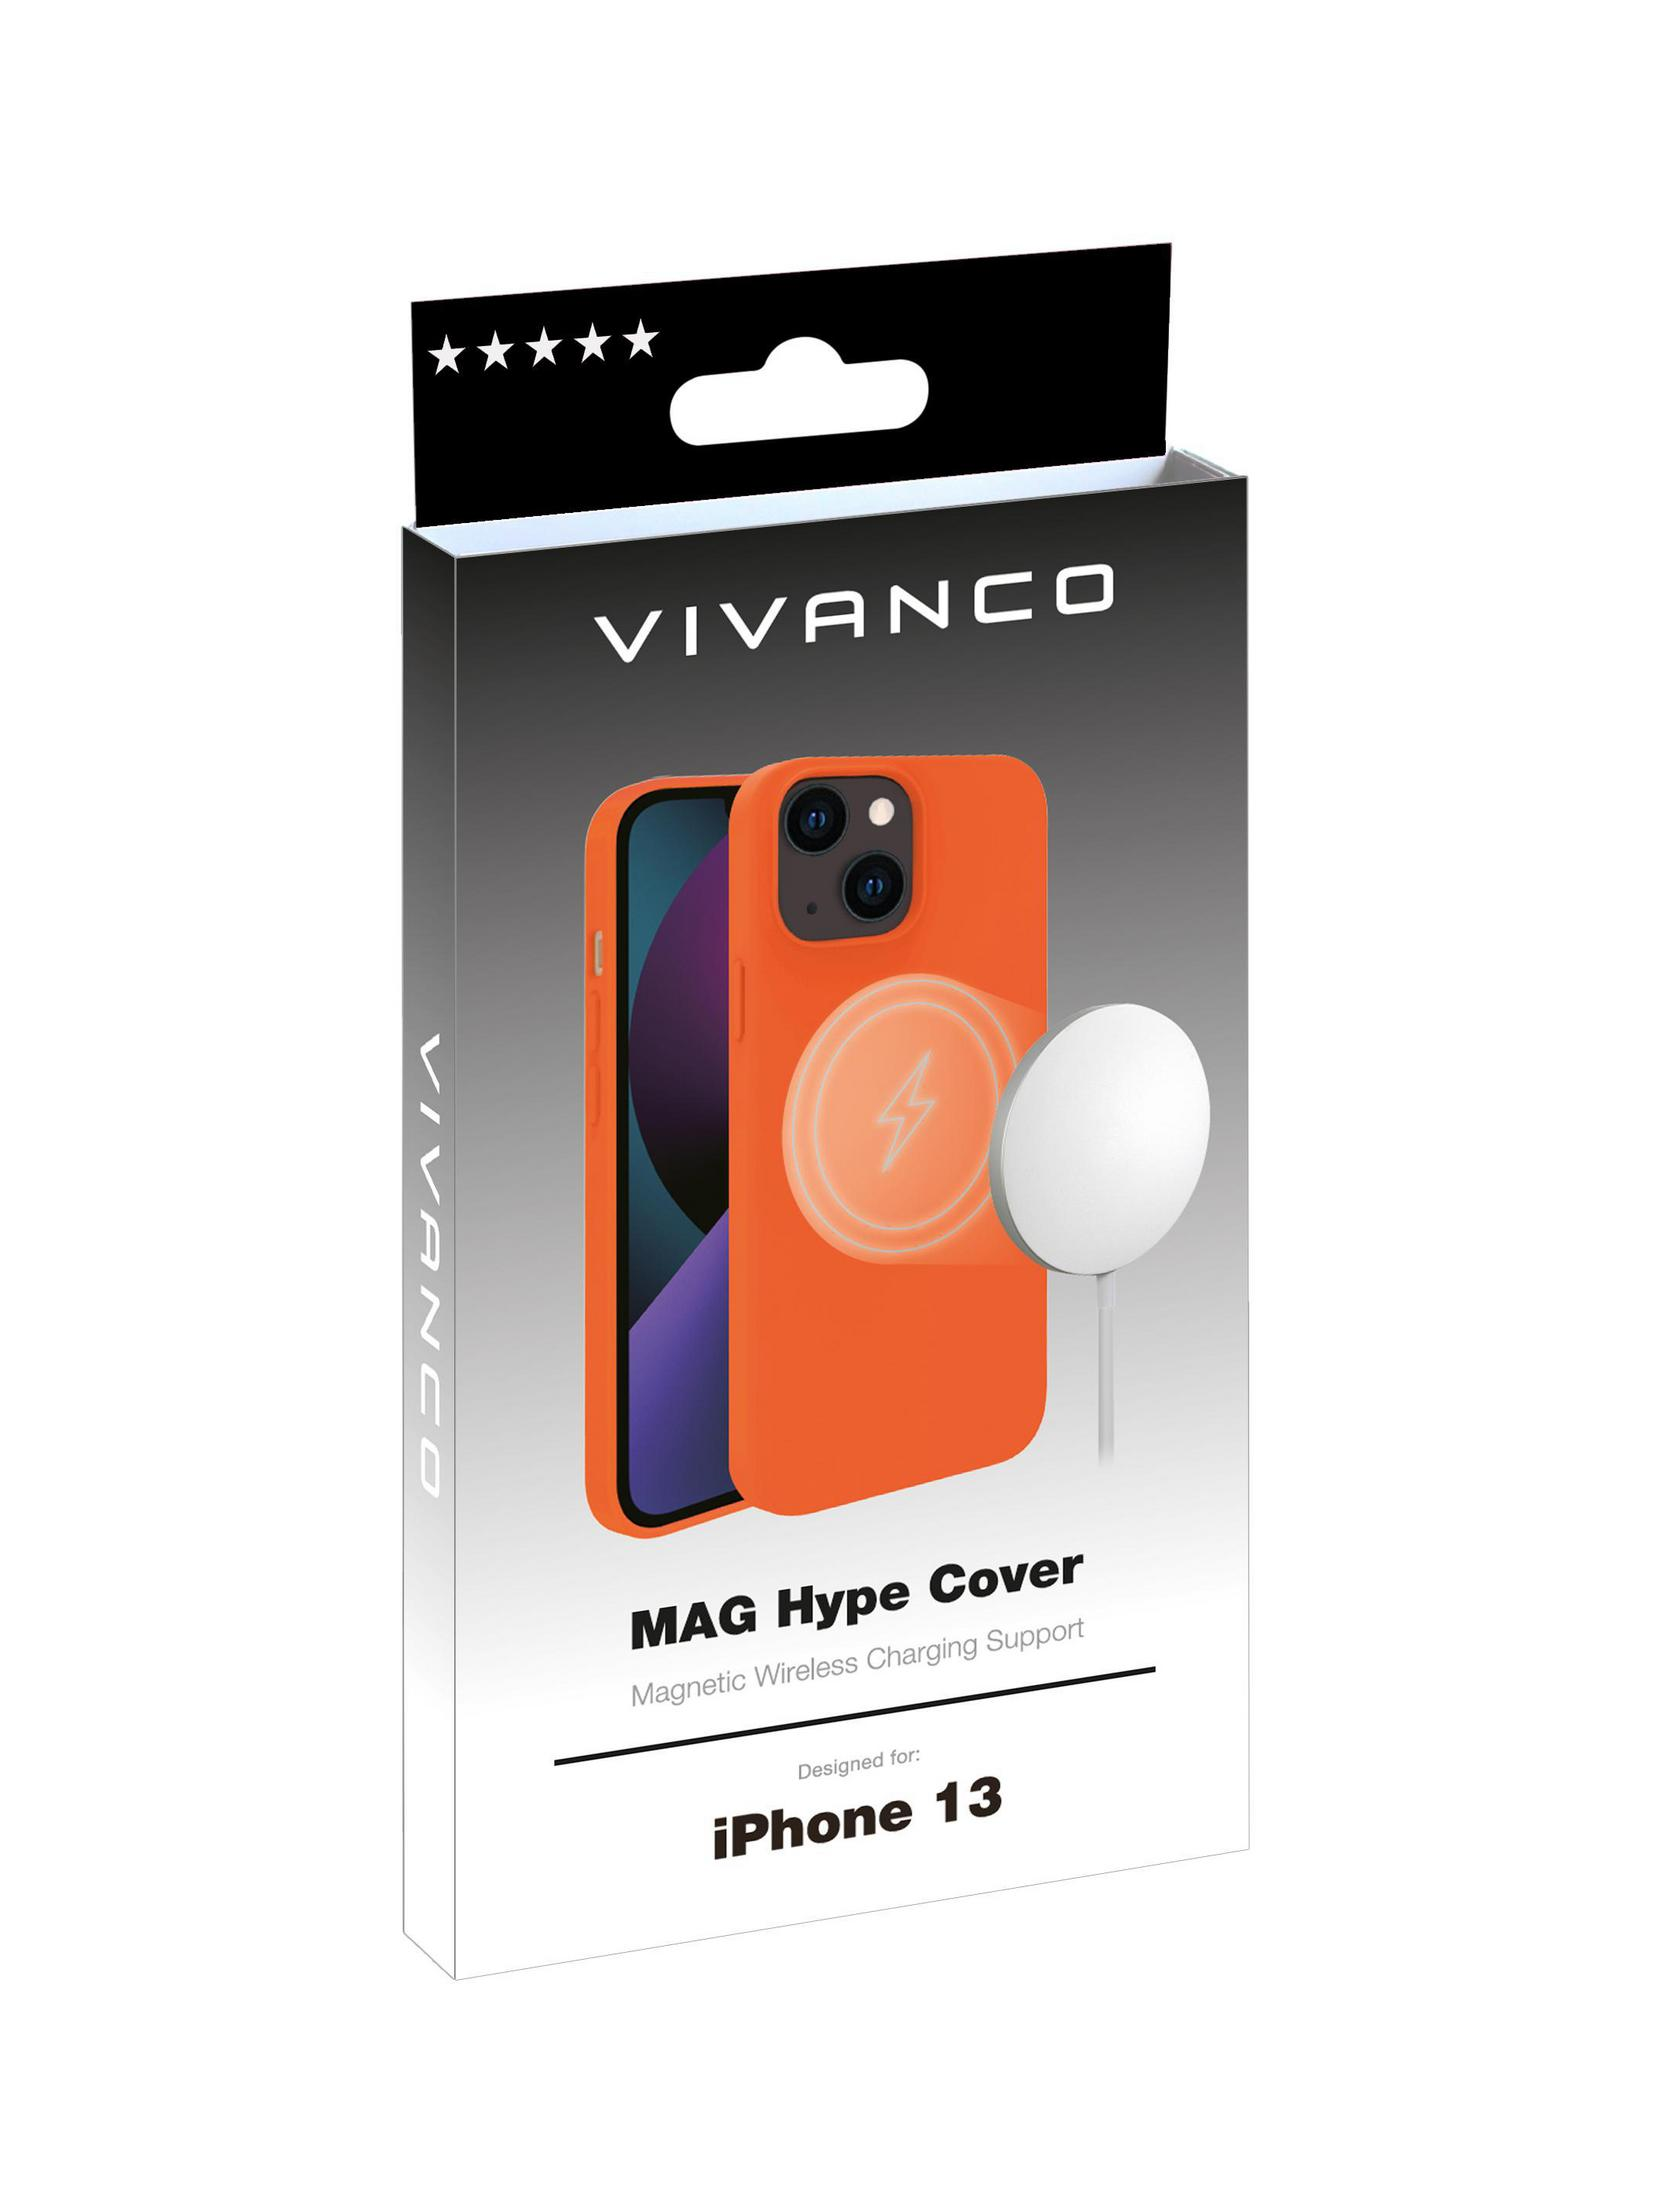 COVER Backcover, Orange Apple, 62946 VIVANCO OR, 13, IPH13 MAGHYPE iPhone